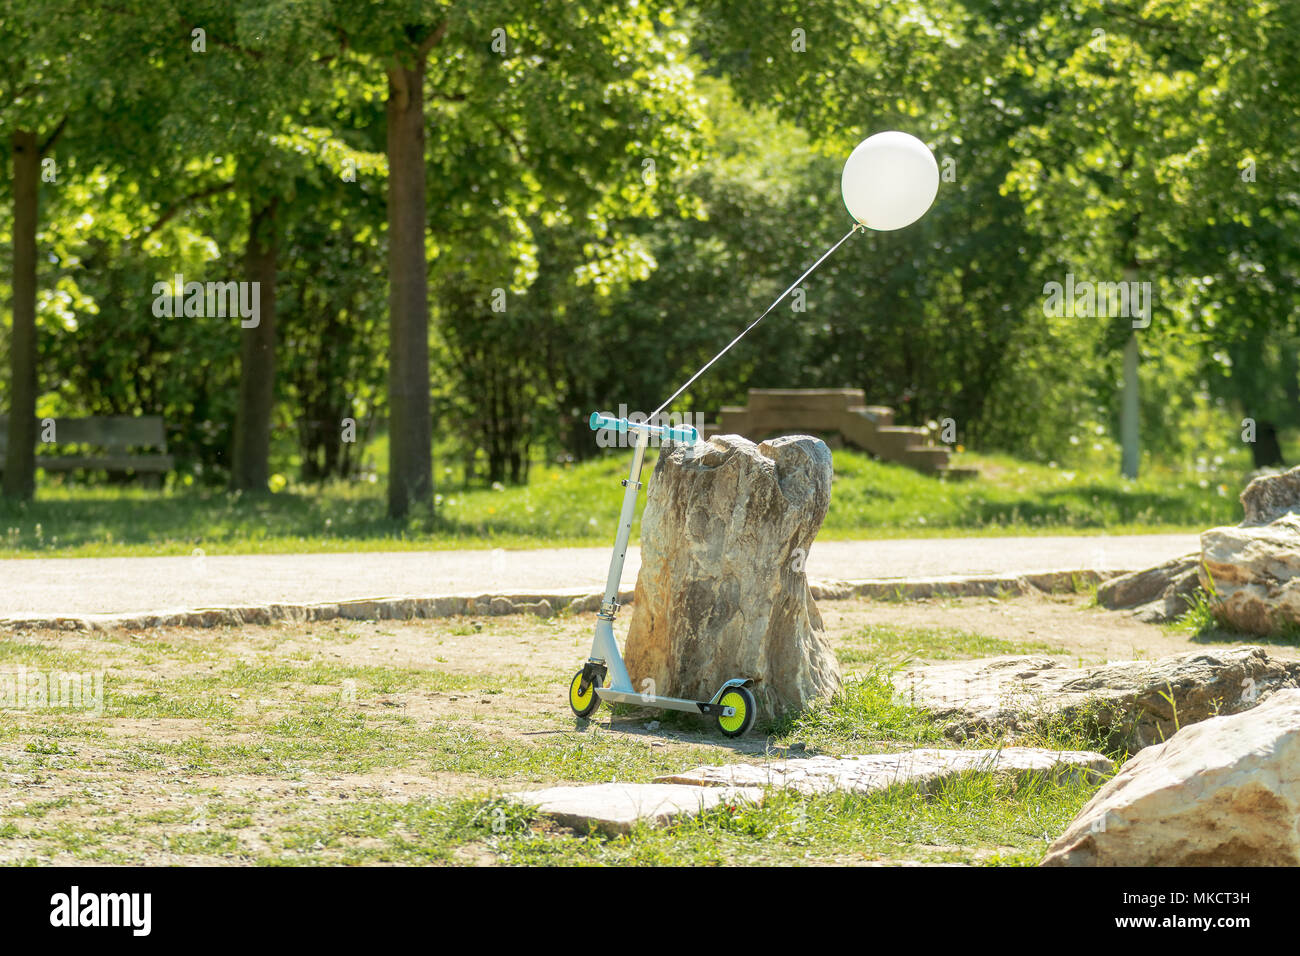 Folding scooter leaning against a large stone in the park. The white balloon filled with helium tied on the handlebars. Lush growing vegetation around Stock Photo